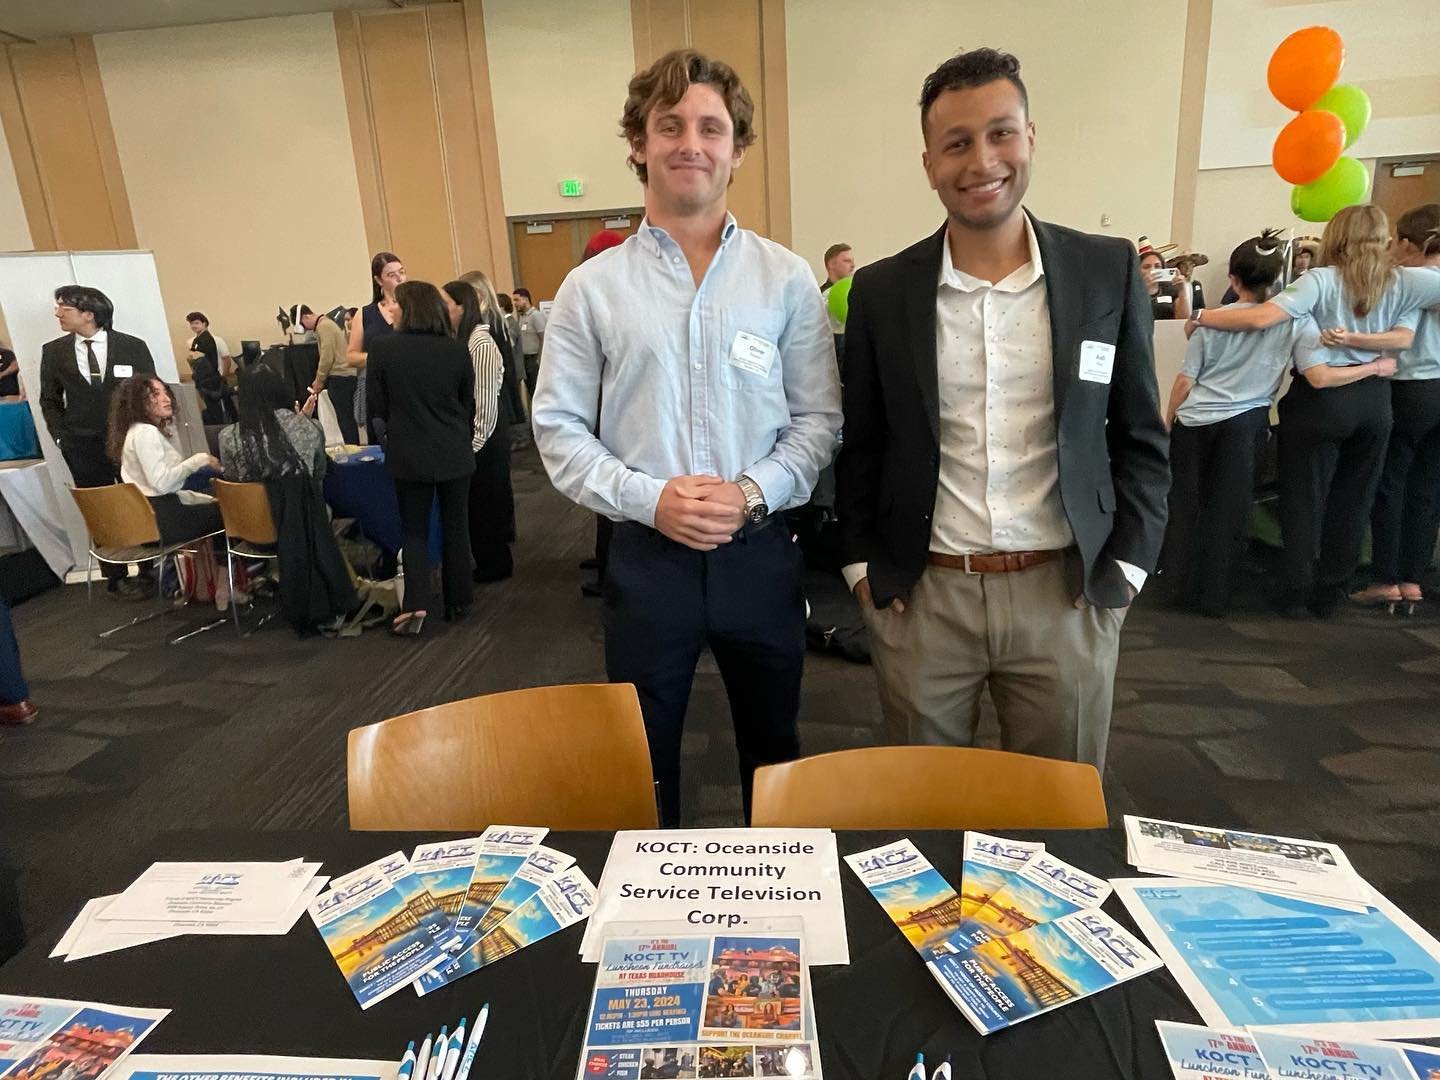 We&rsquo;re absolutely thrilled to have been chosen as a representing organization for @csusm&rsquo;s Senior Experience Program! These pictures are from tonight&rsquo;s Senior Experience Trade Show in which CSUSM Business Administration Students are 